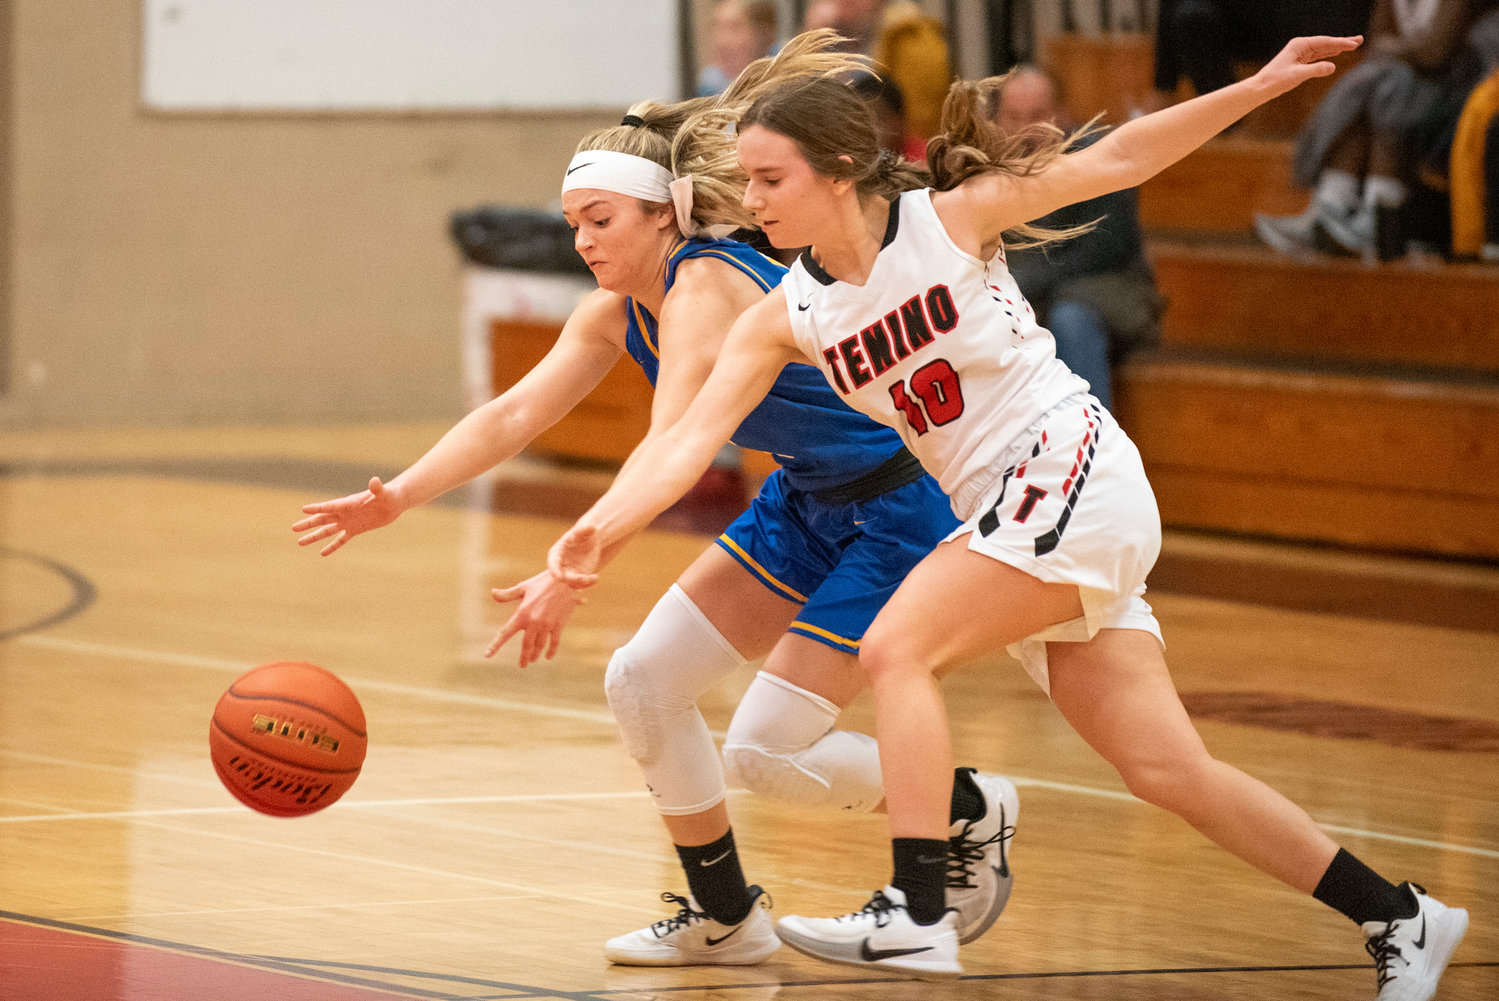 Tenino's Grace Vestal (10) and Adna's Kaylin Todd battle for a loose ball on Dec. 14.